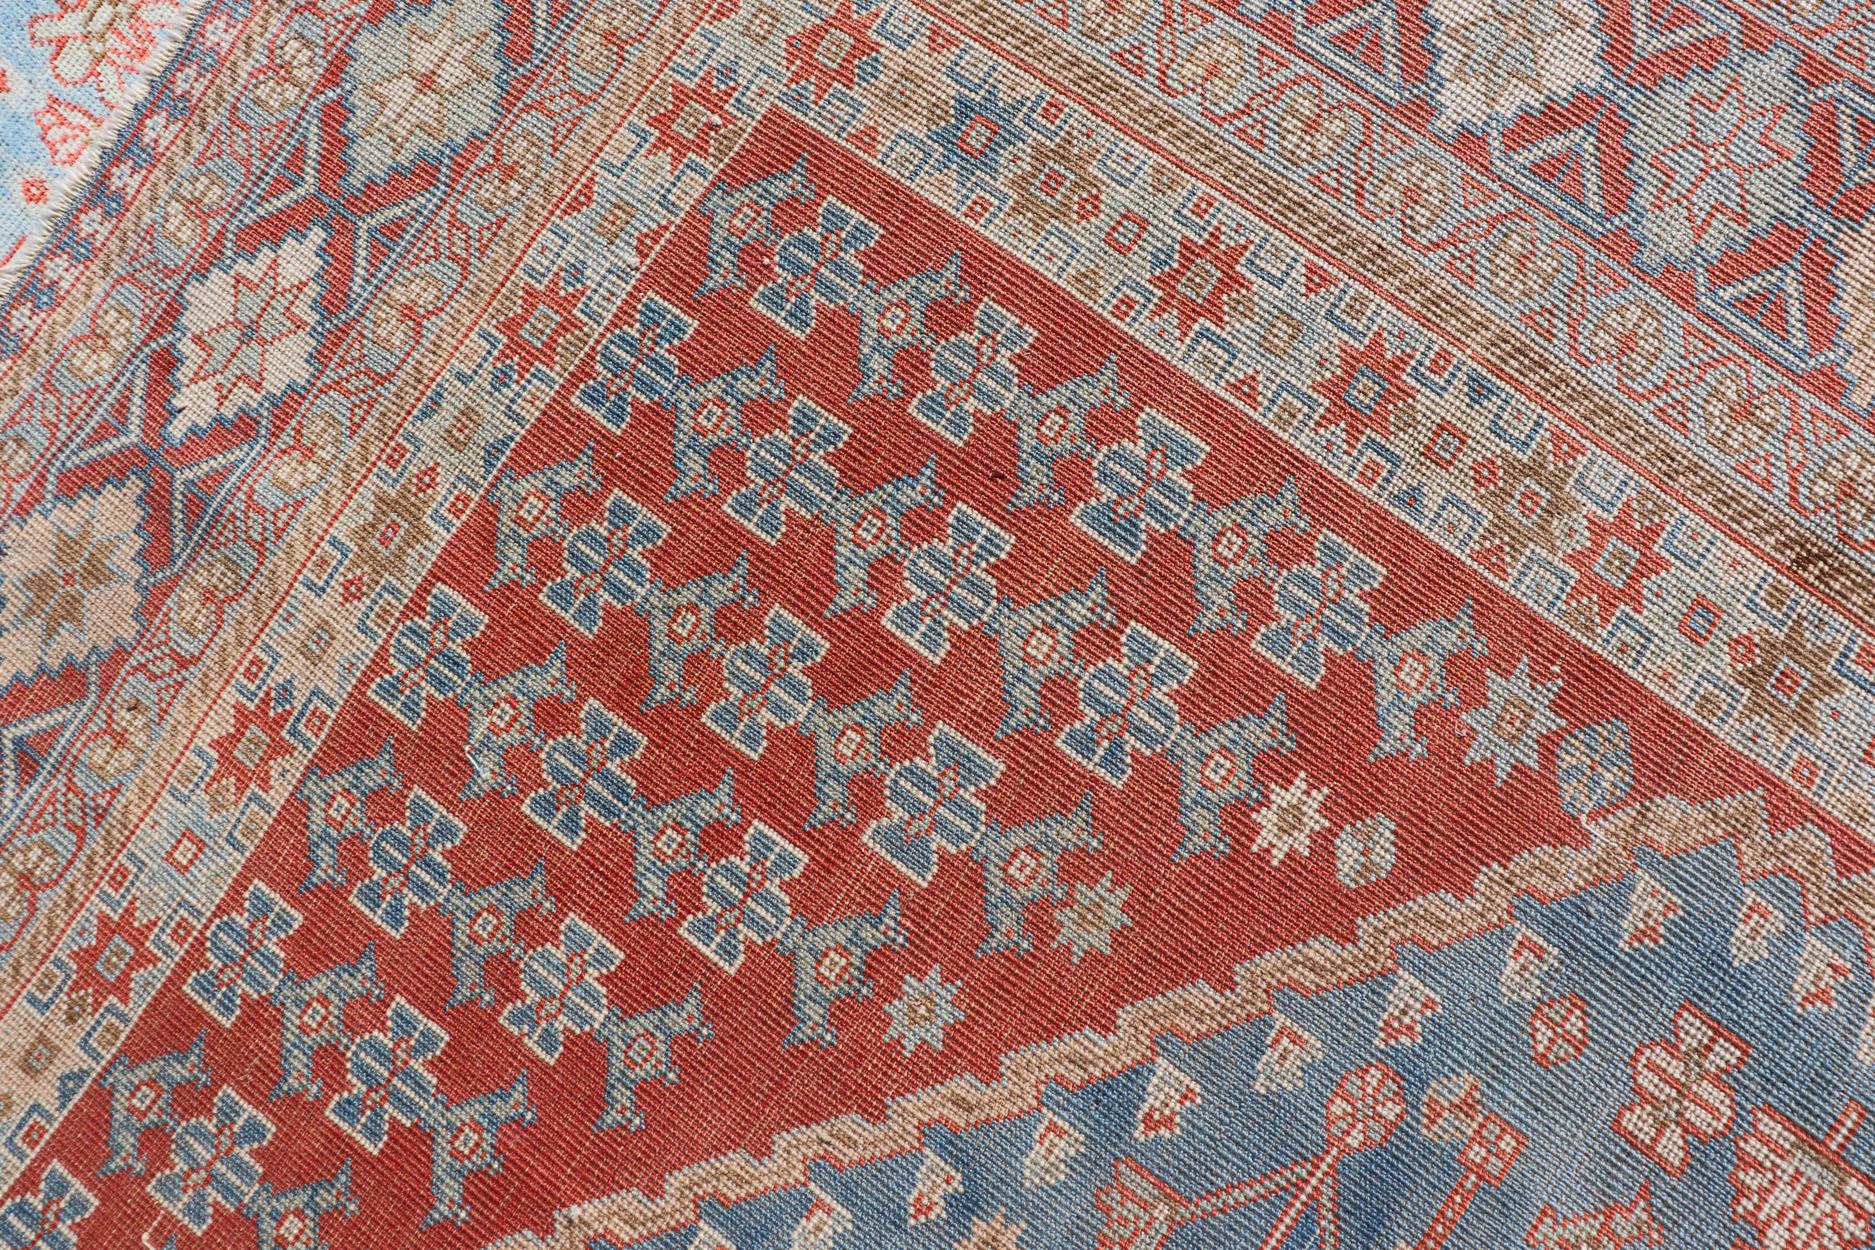 Antique Persian Qashqai Shiraz Tribal Rug with Latch Hooked Diamond Design For Sale 10